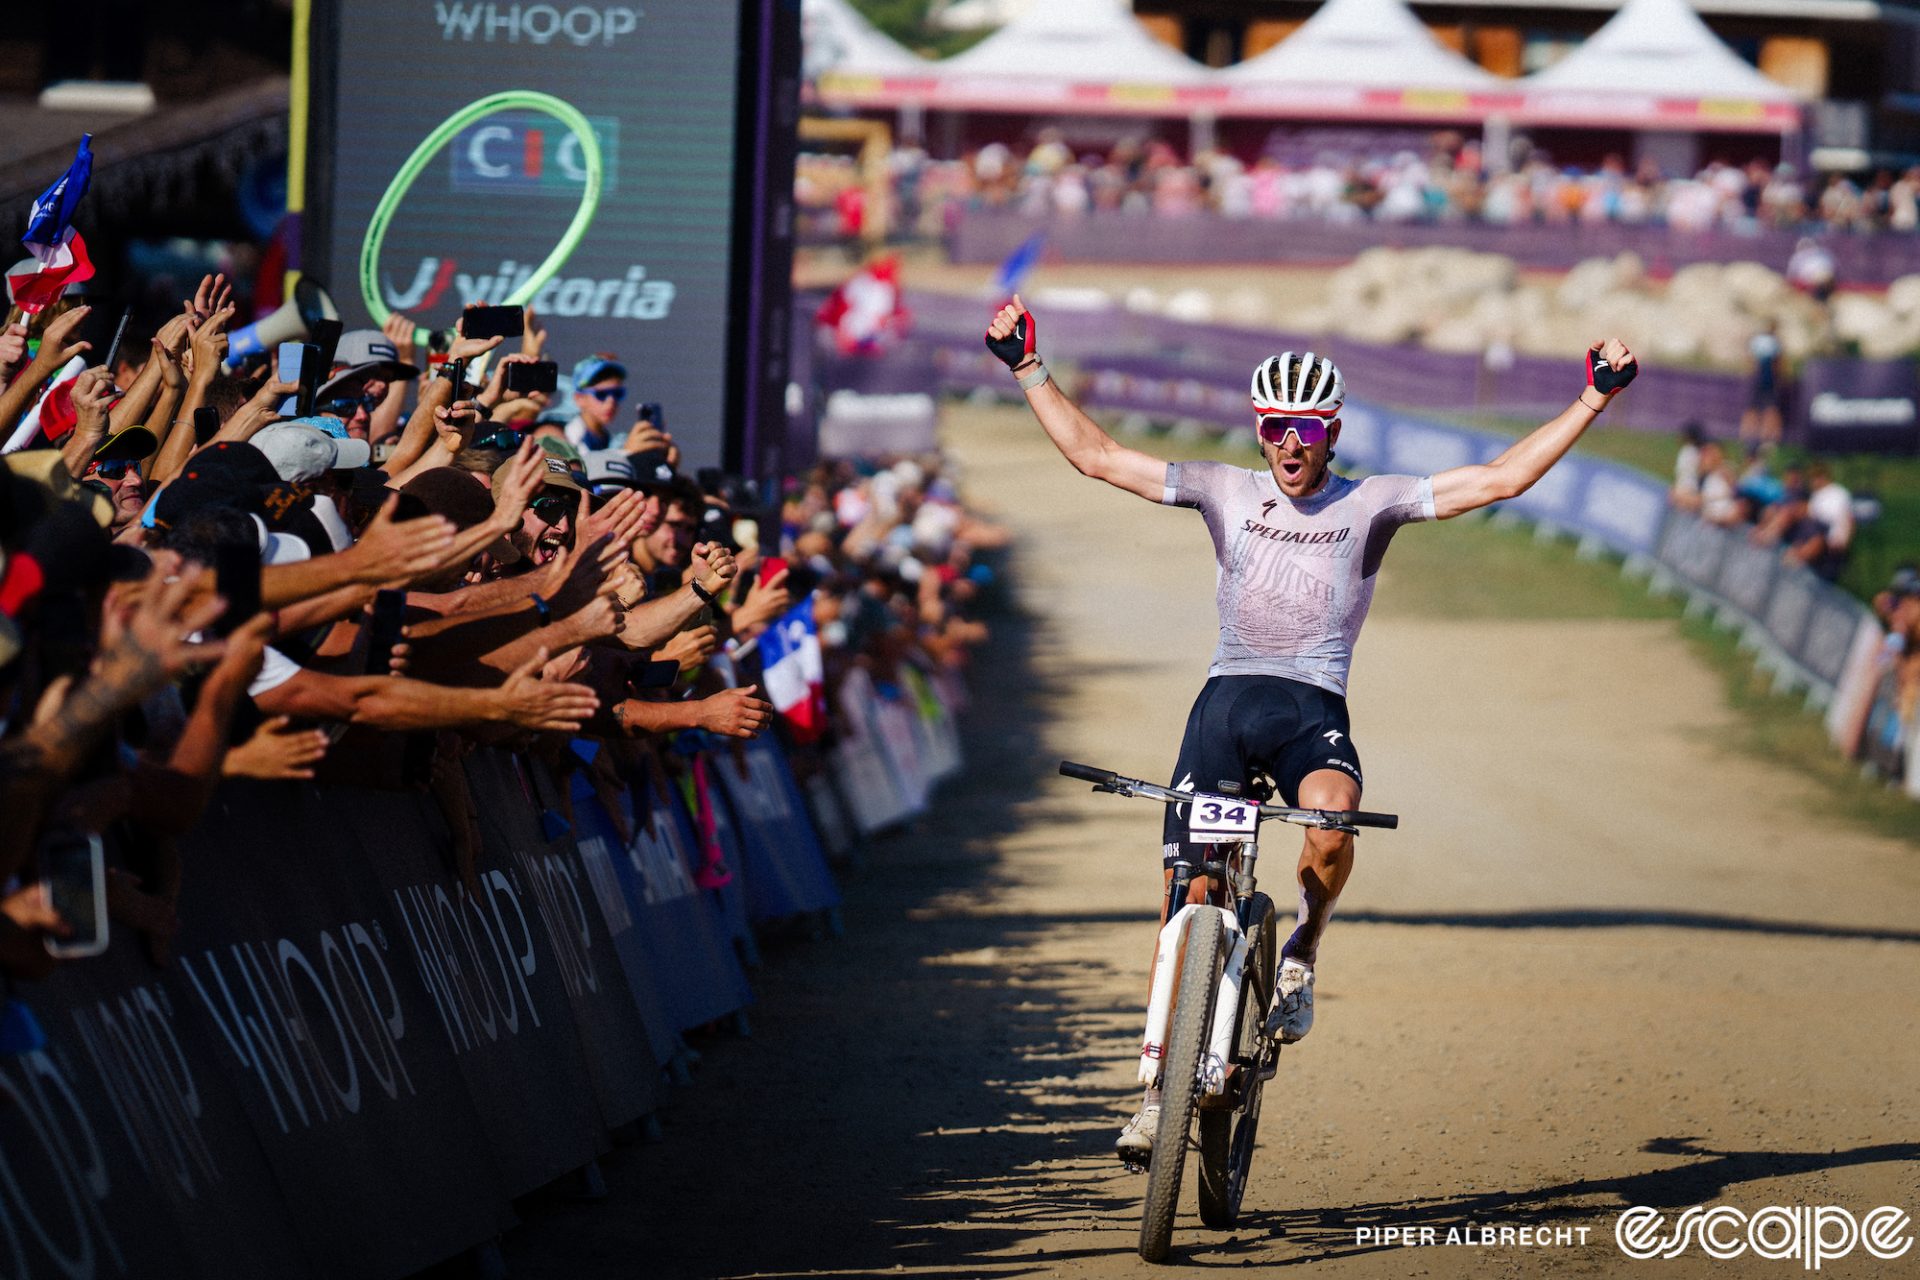 Victor Koretzky crosses the finish line to win the Les Gets round of the 2023 World Cup XCO series. He's all alone, arms in the air, as a large crowd cheers him on.